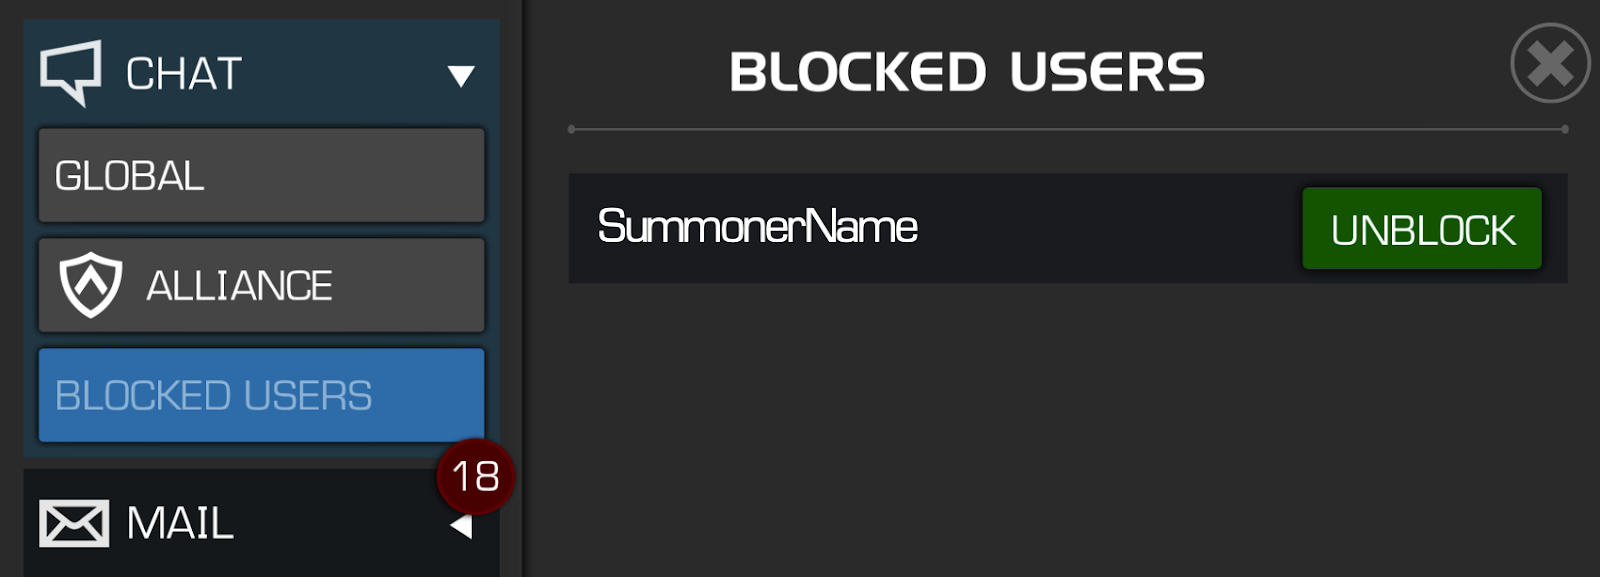 A screenshot showing the Blocked Users section